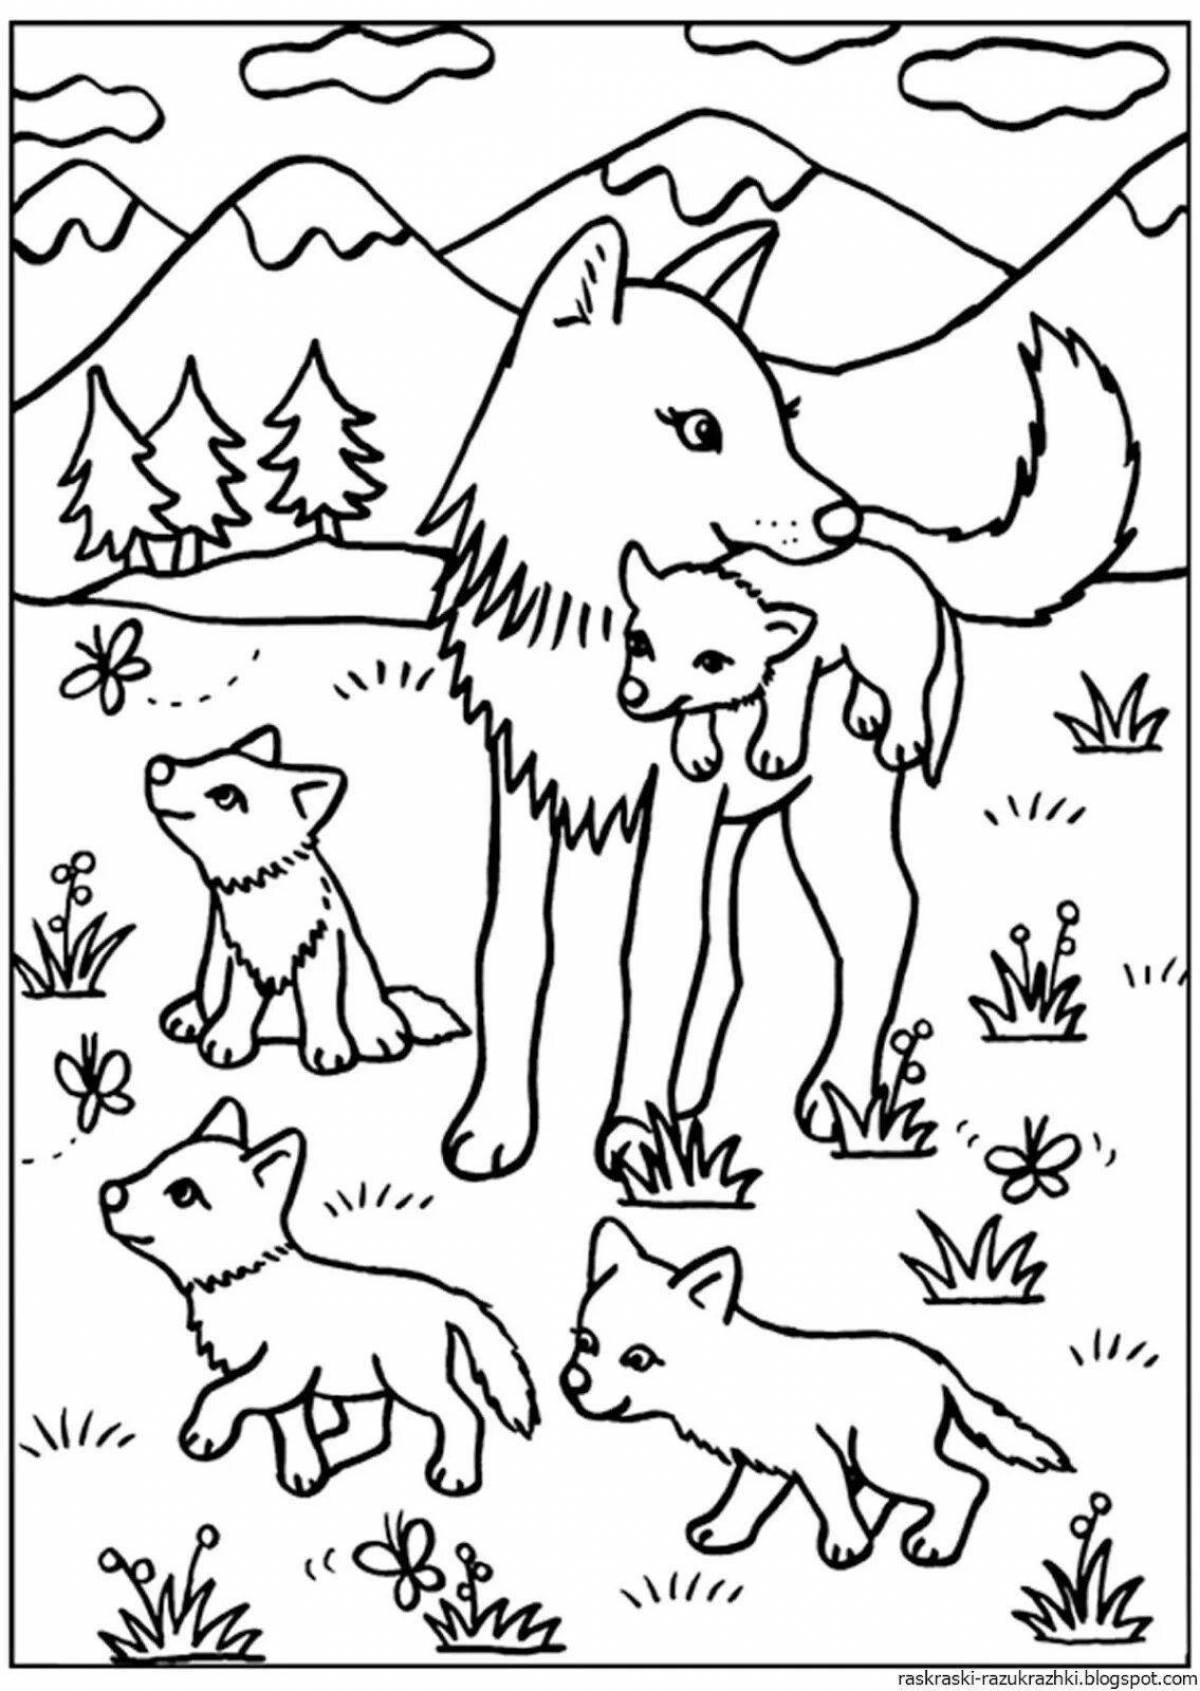 A fun coloring of wild animals in our forests